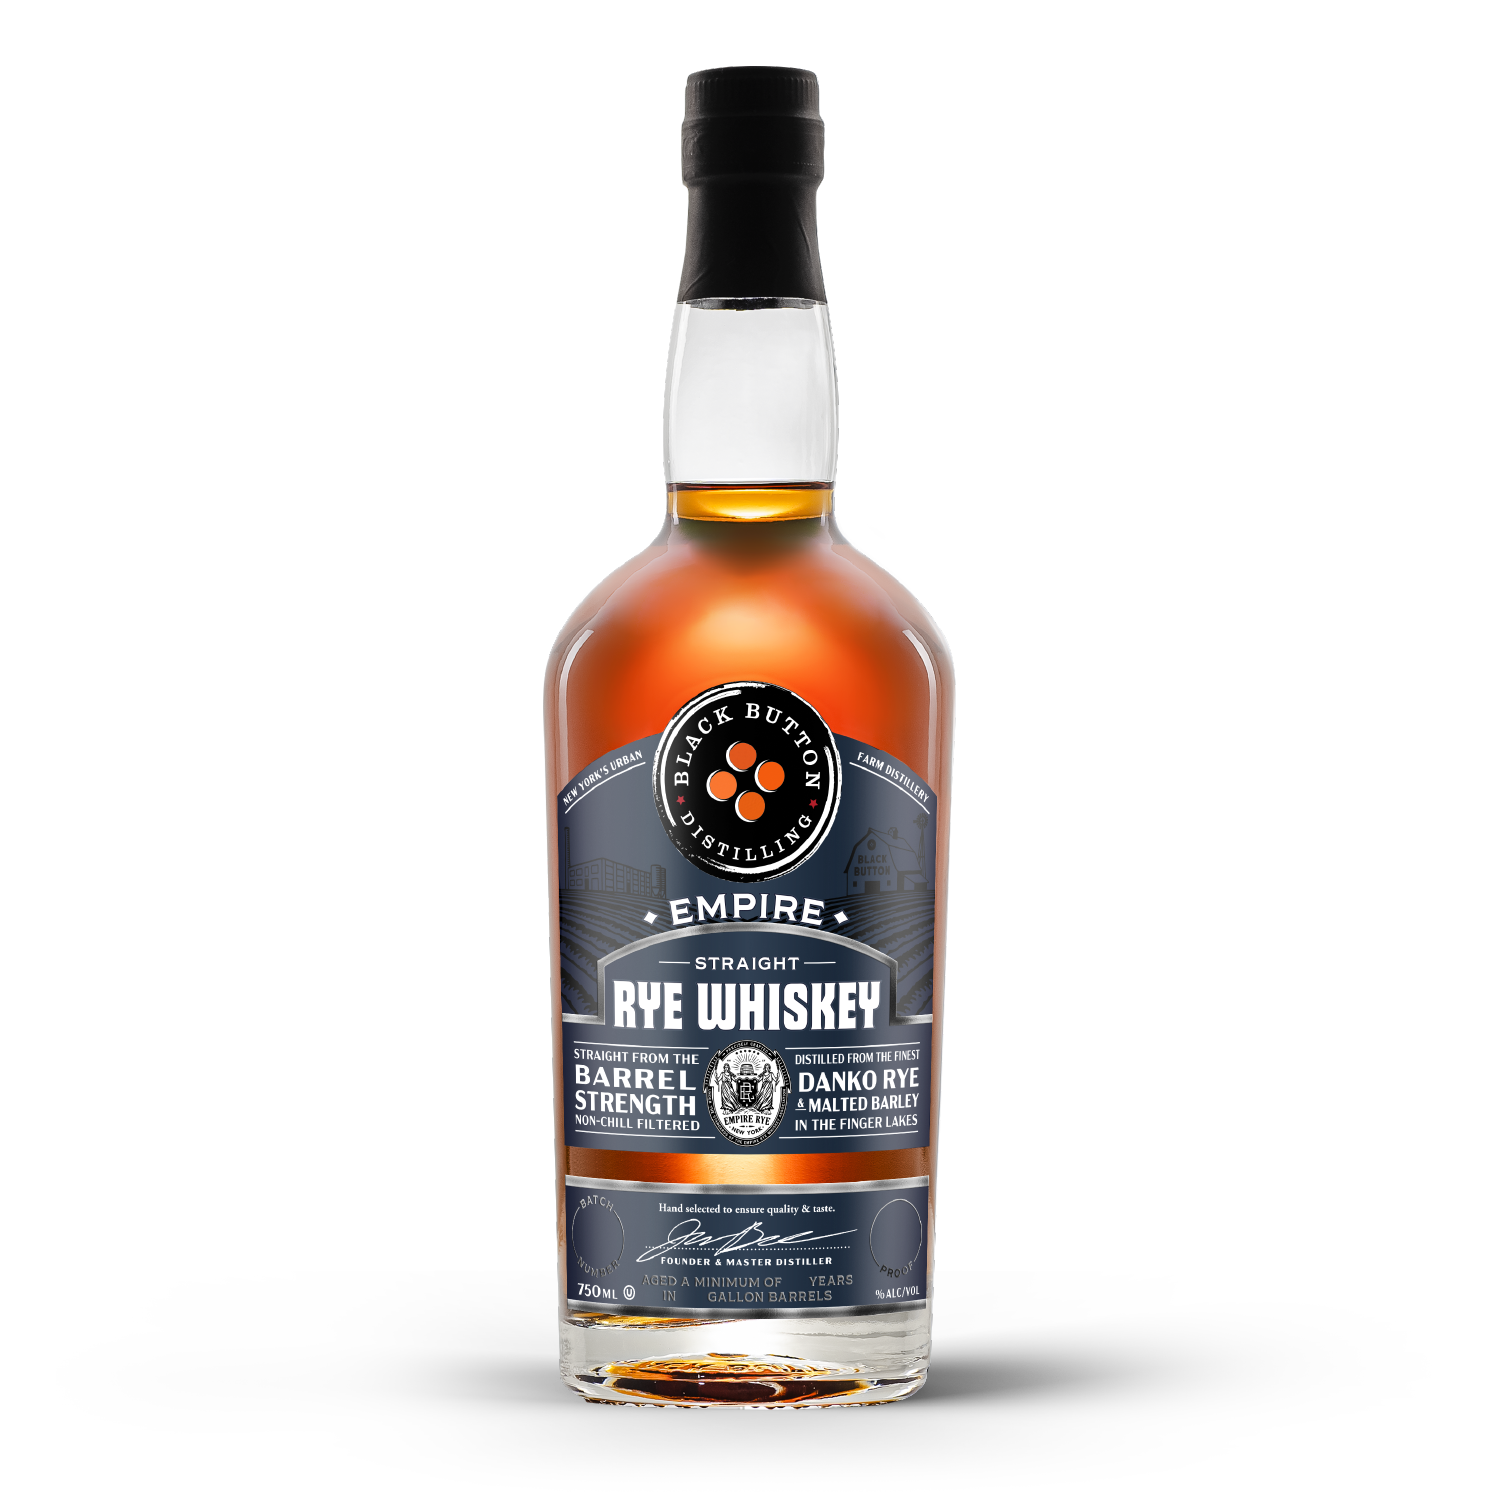 Highly Limited Barrel Strength Empire Rye Whiskey